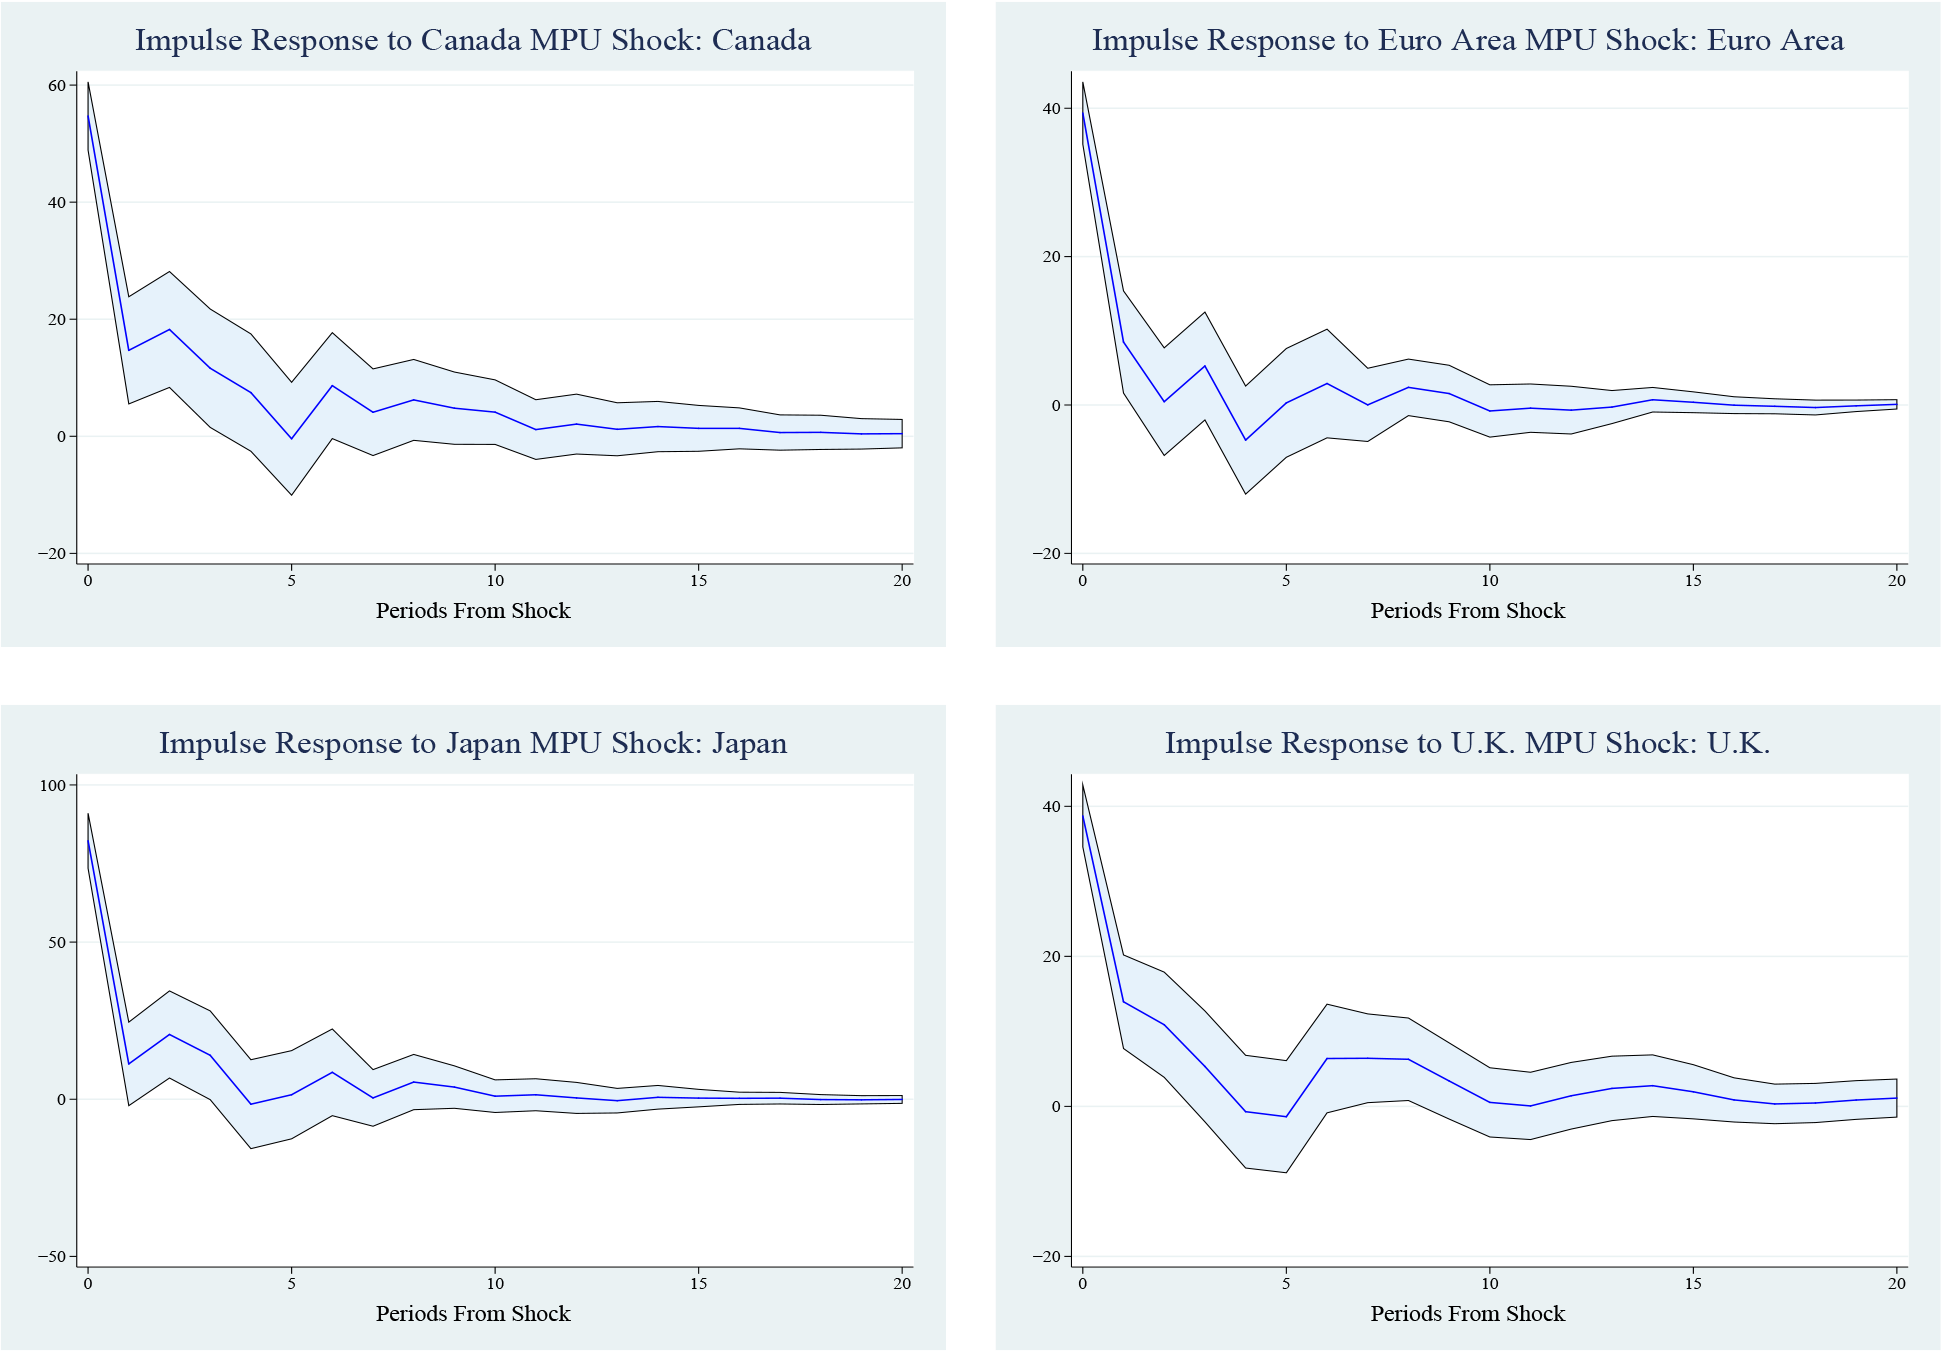 Figure 5. Impulse Responses to Own-Country Shocks. See accessibile link for data description.